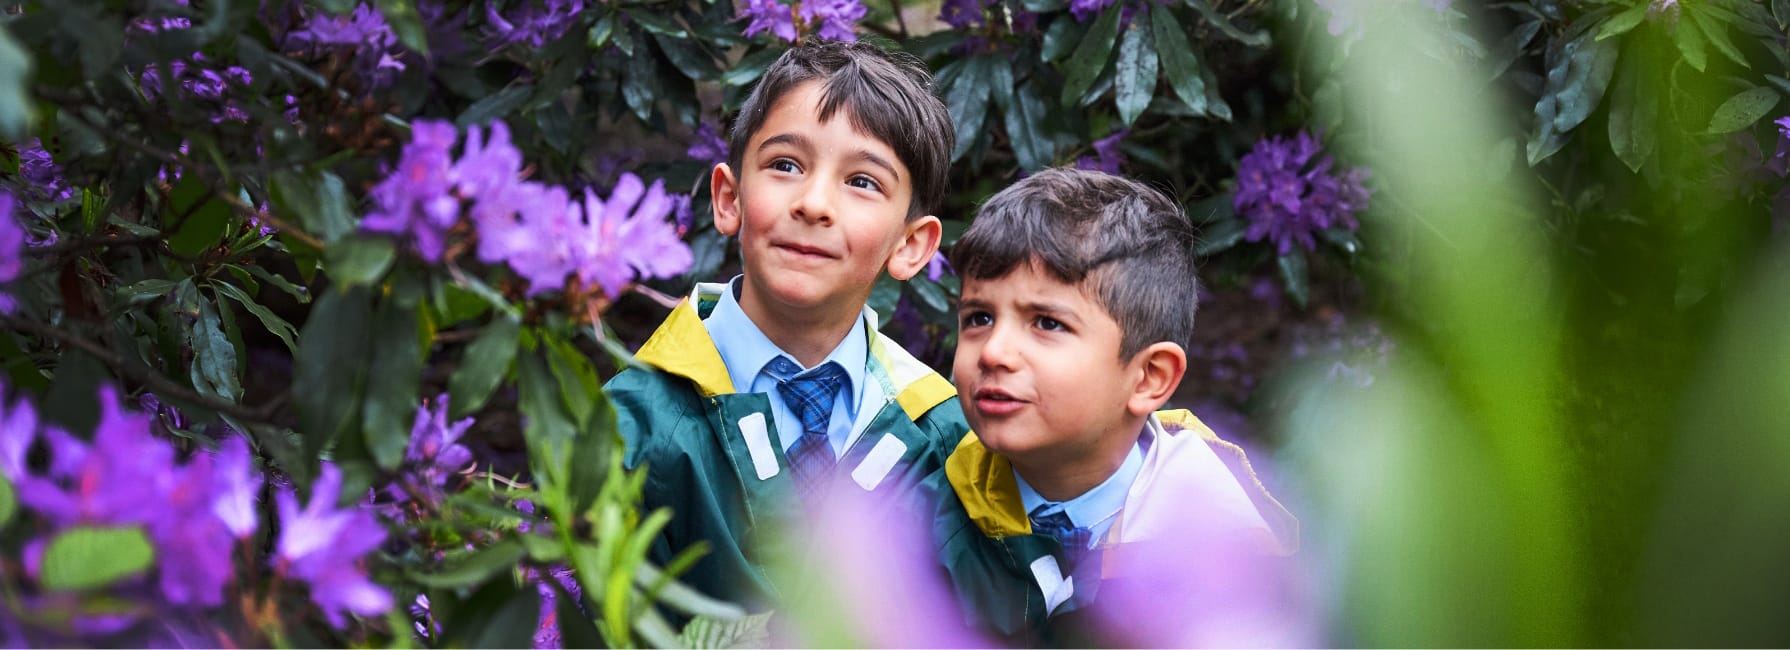 Two Pre-Prep pupils stand amongst flowers during their Forest School class looking curiously.